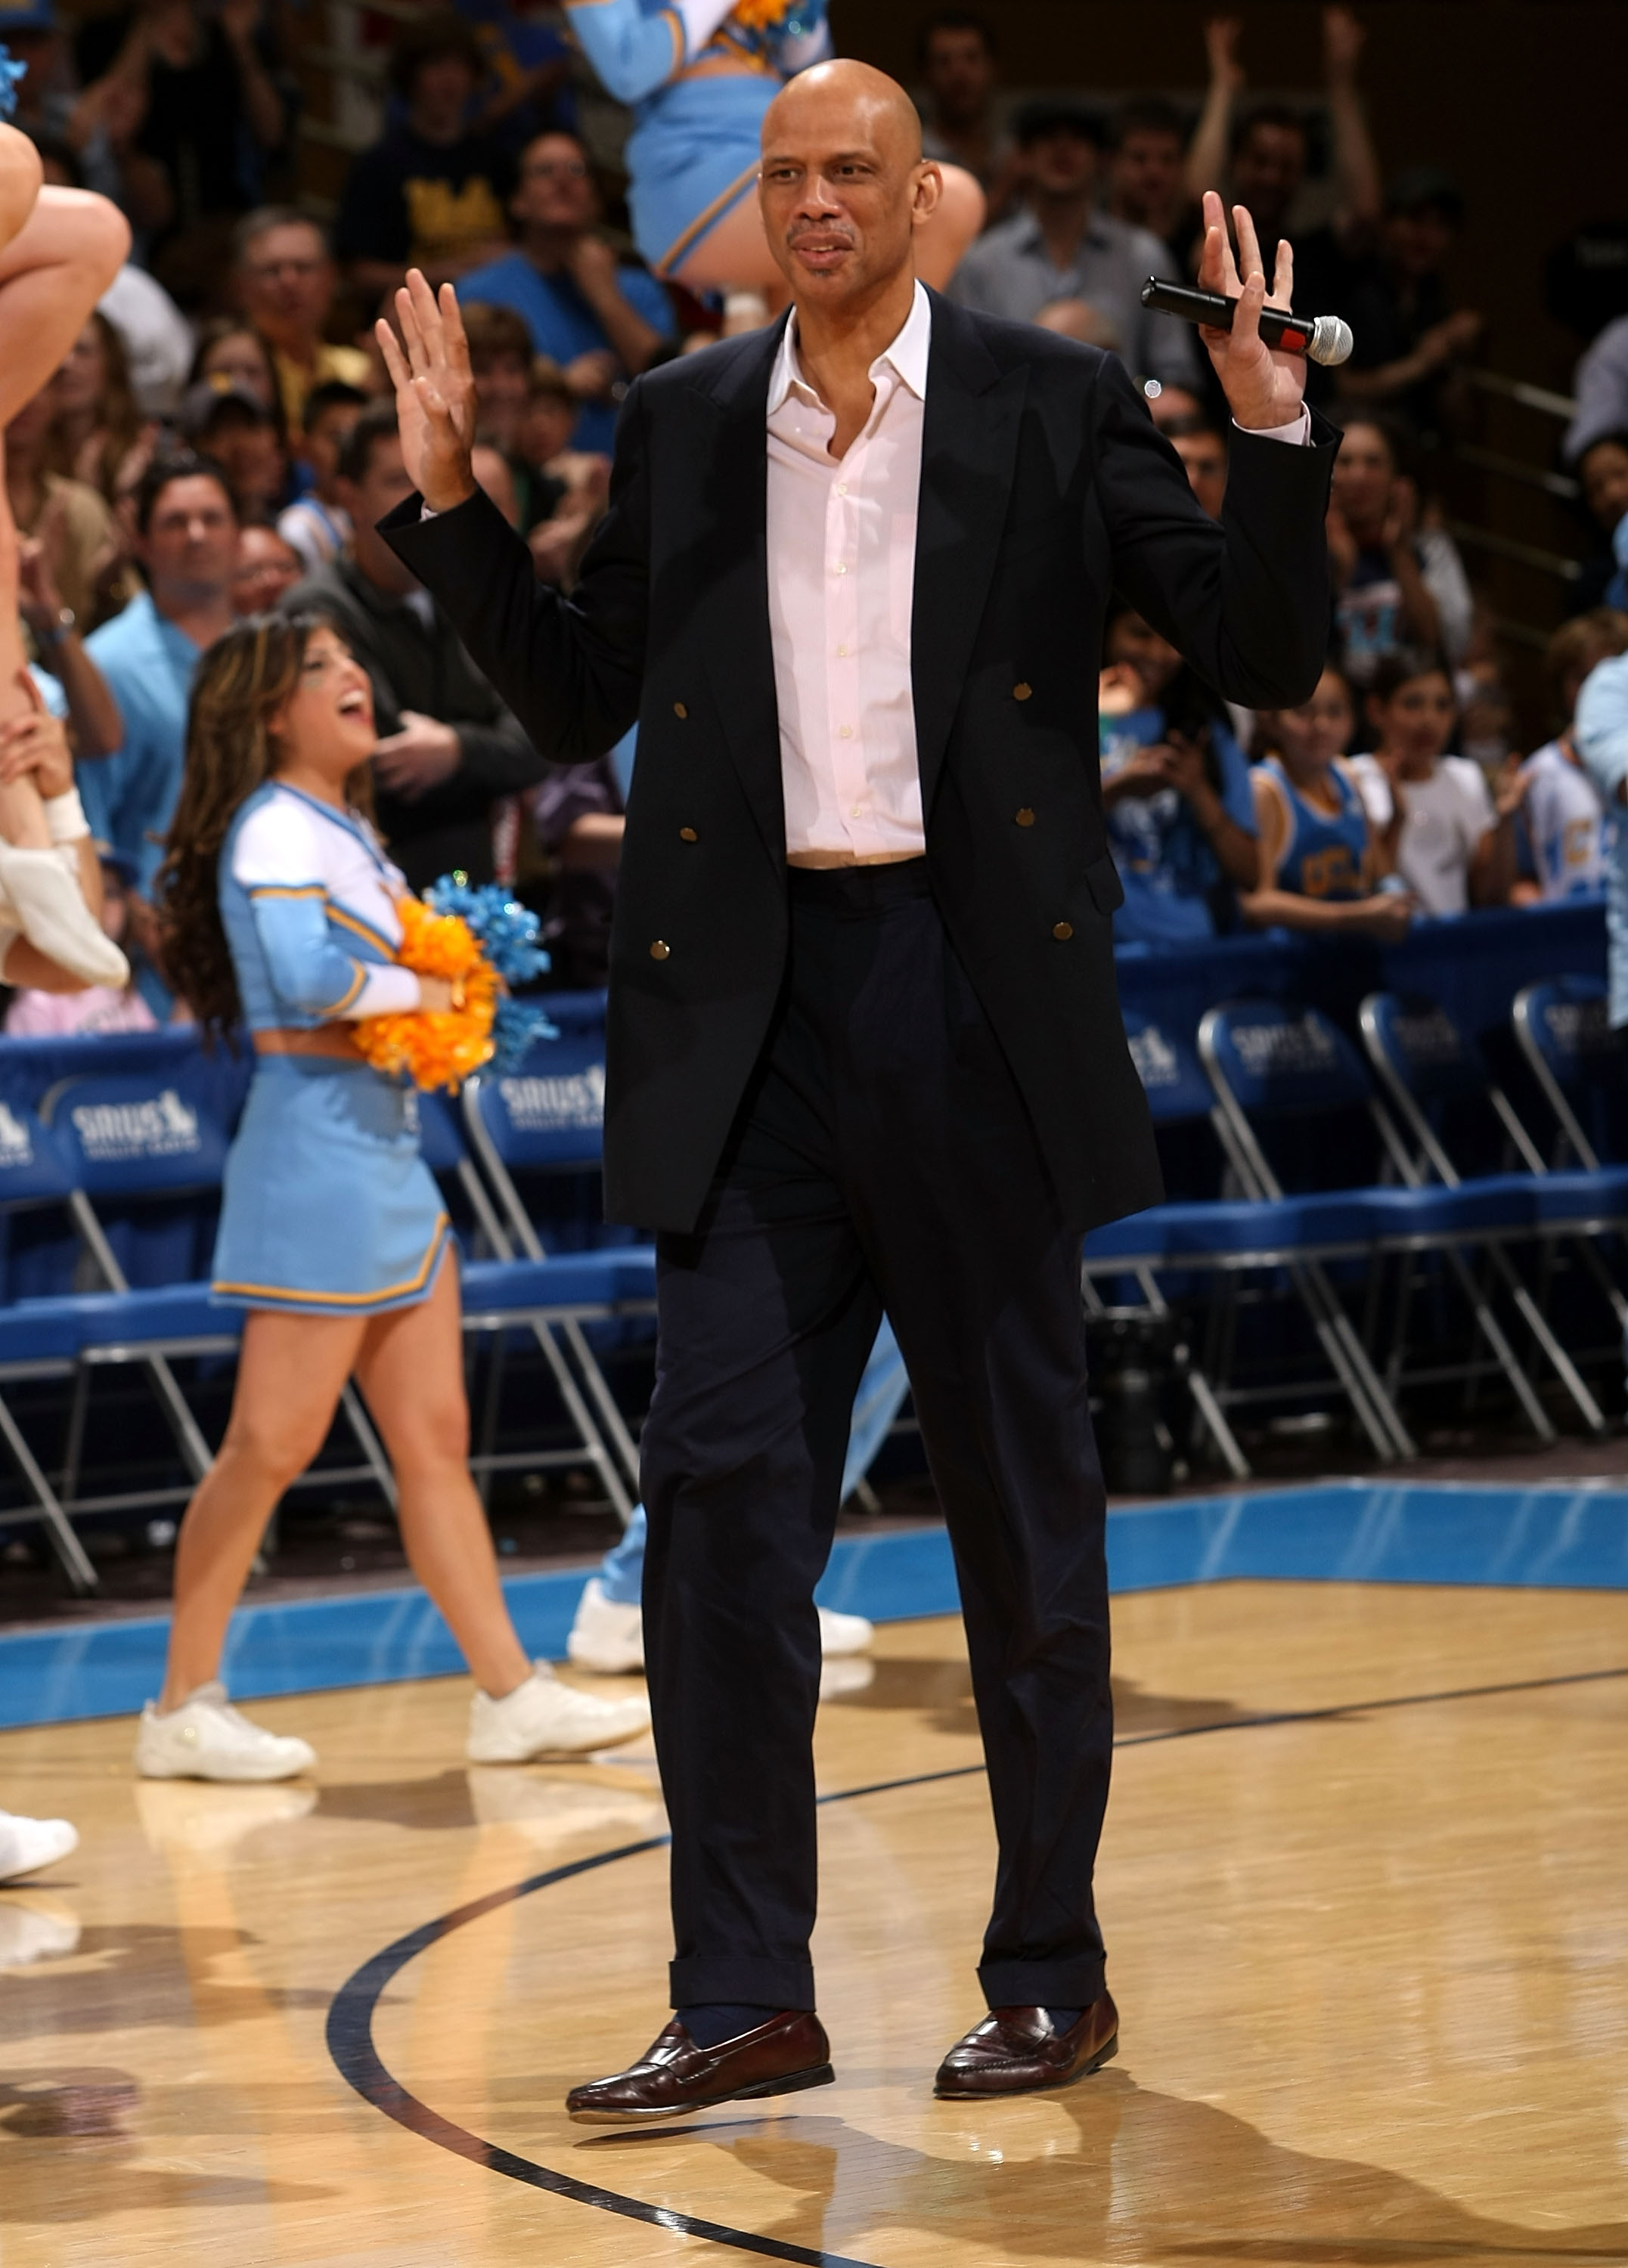 WESTWOOD, CA - MARCH 08: Former player Kareem Abdul Jabar of the UCLA Bruins waves to the crowd during ceremonies honoring his 1967-68 NCAA championship team at halftime of the game with the California Golden Bears on March 8, 2008 at Pauley Pavillion in 